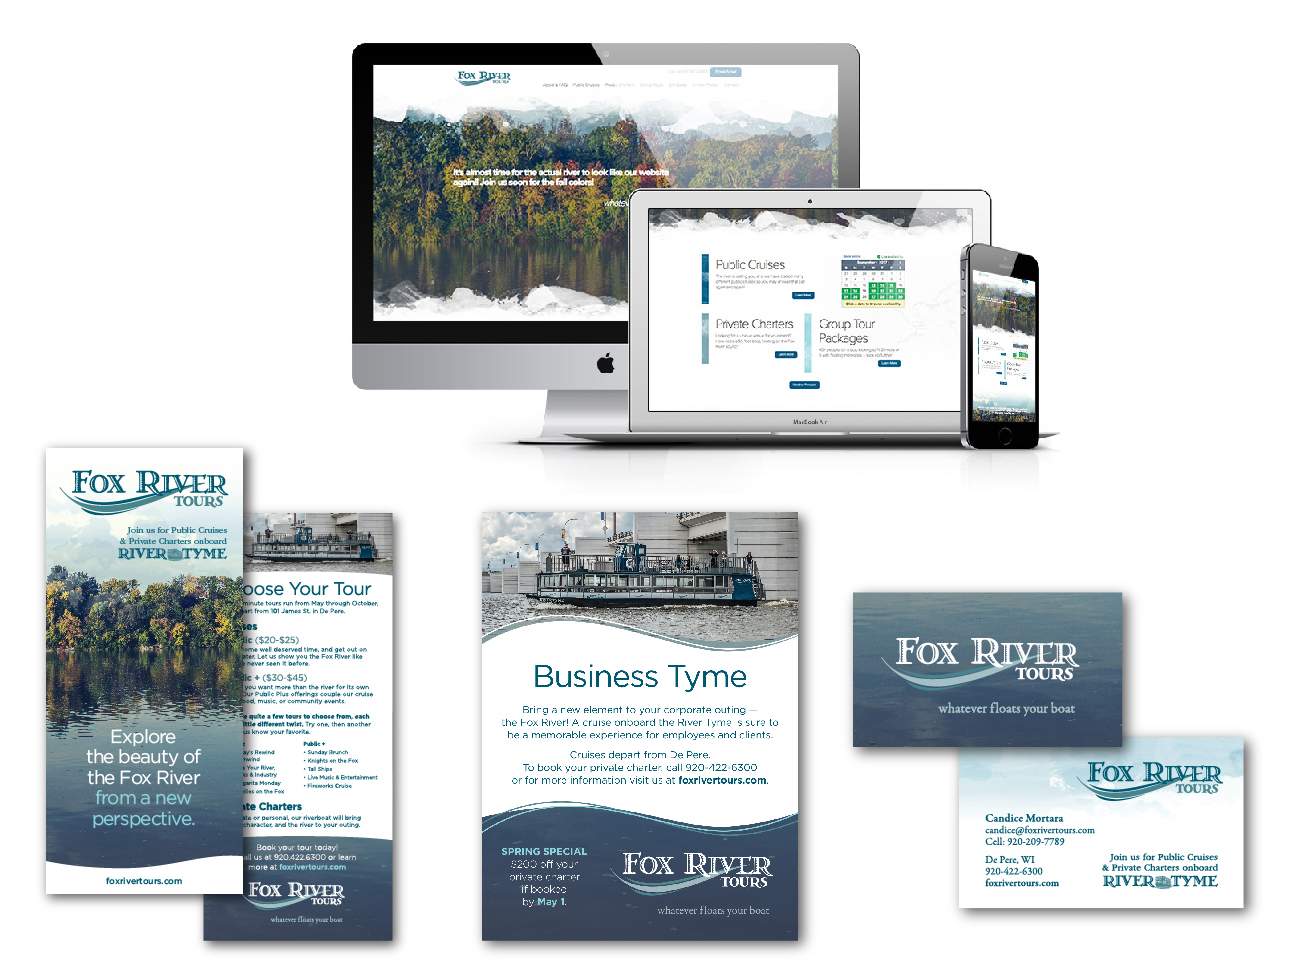 Fox River Tours website and print collateral